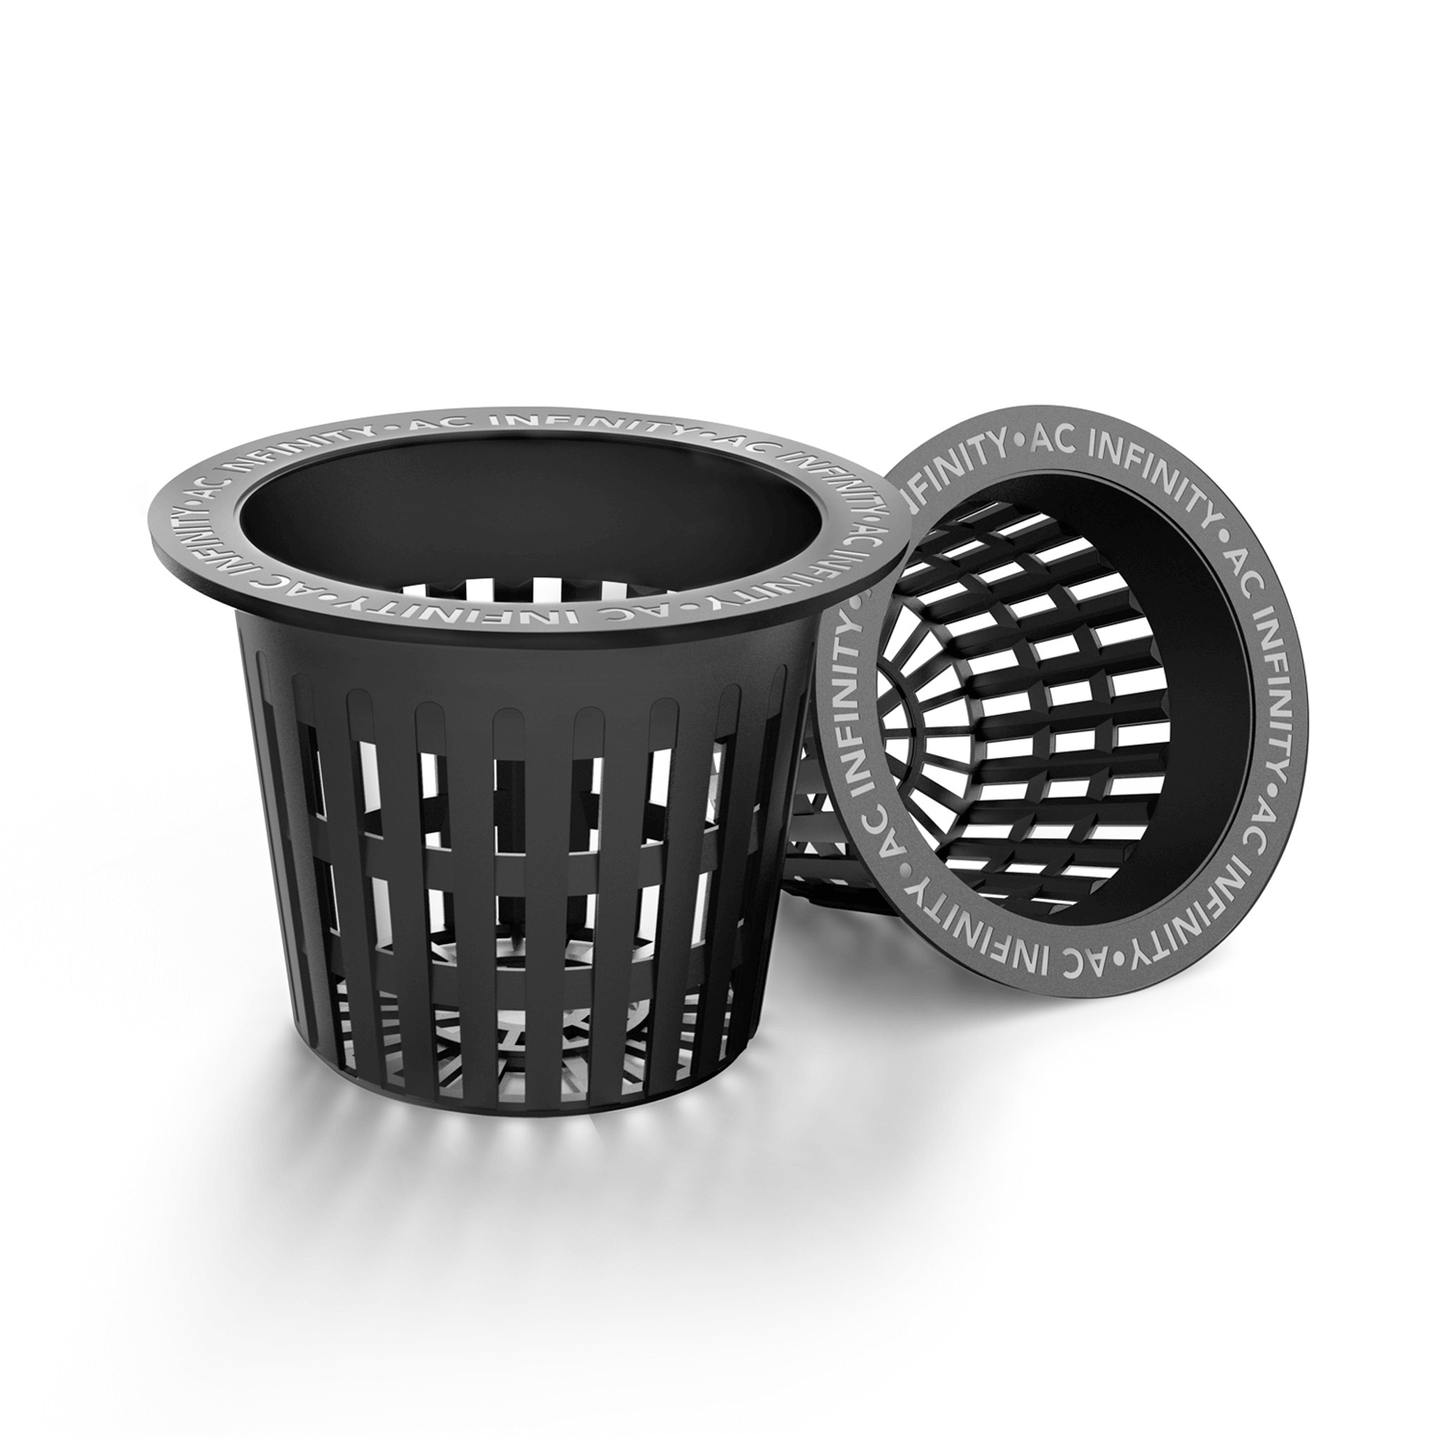 AC Infinity Mesh Net Cups, Slotted Pots with Wide Lips, 3-Inch, 25-Pack AC-NCA3-25 Planting & Watering